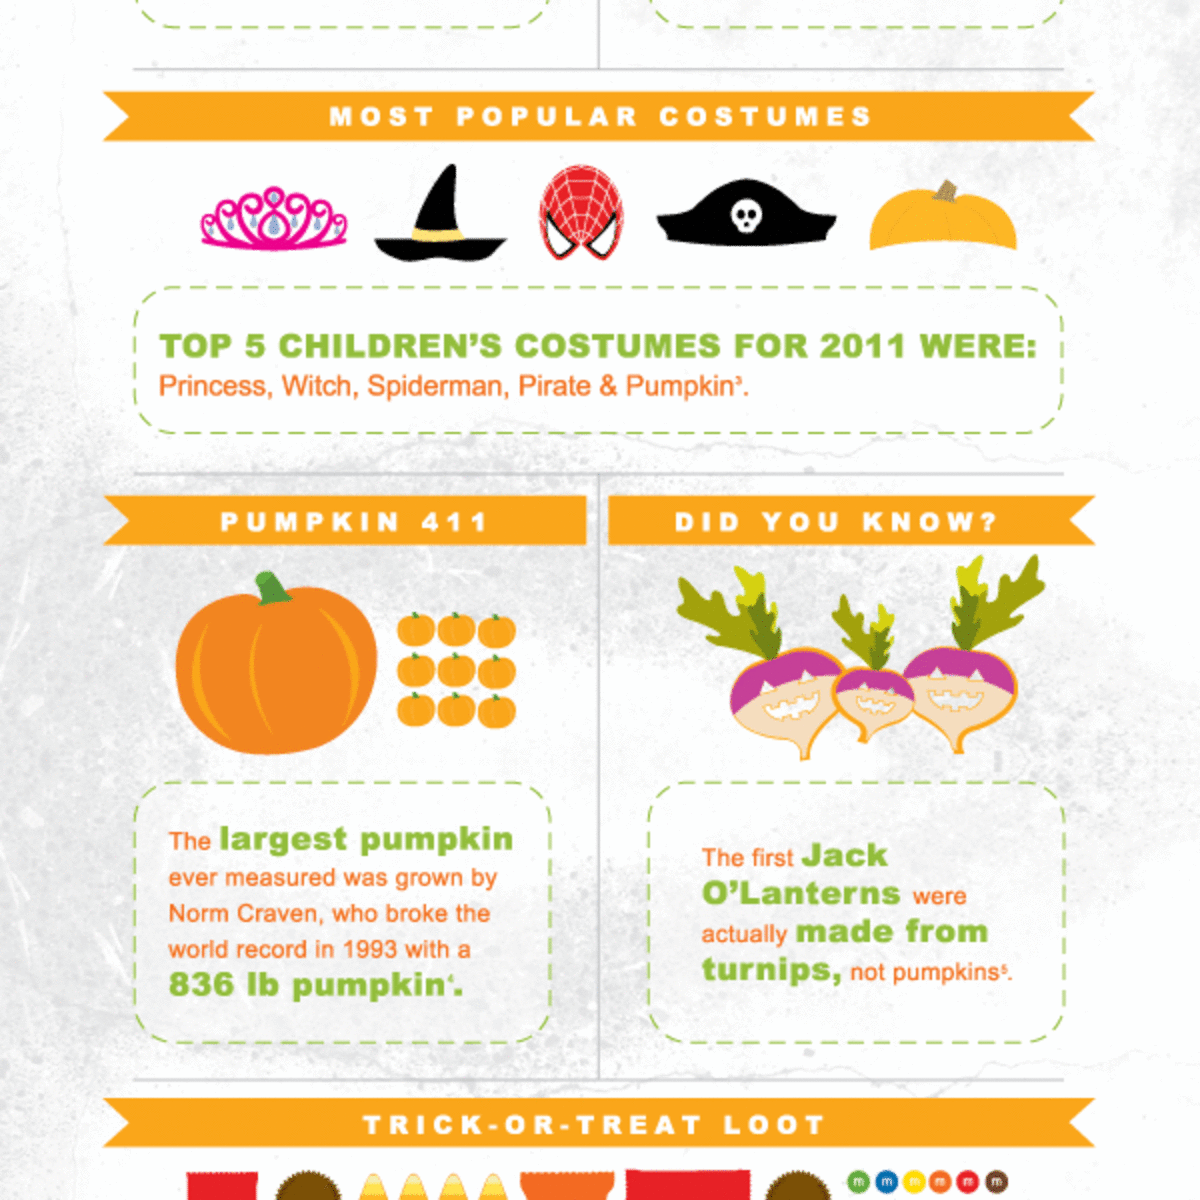 Infographics on Halloween Candies – The Popular Items for Trick